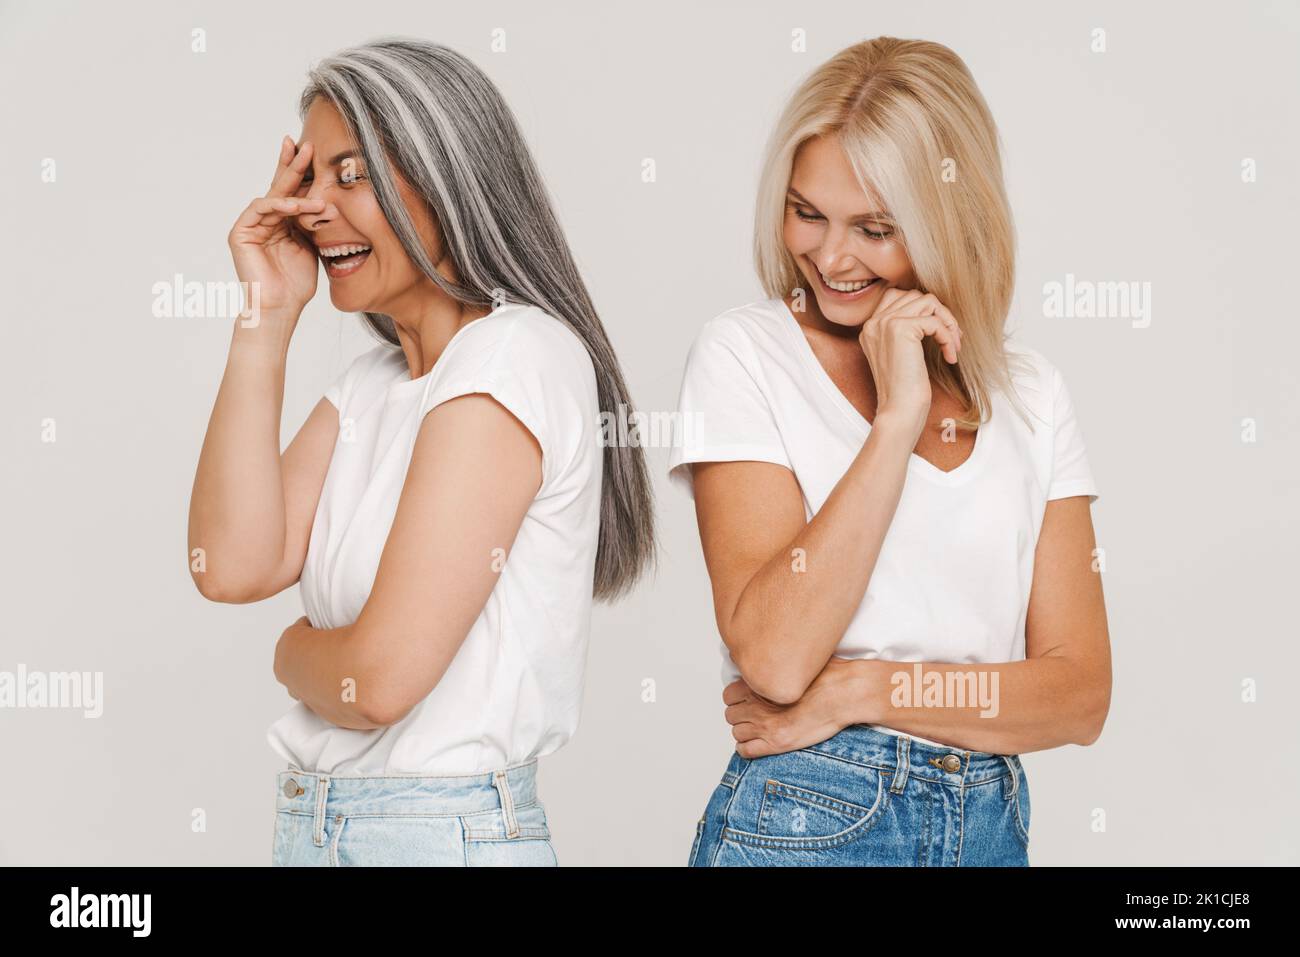 Mature multiracial women with gray hair wearing t-shirts laughing at camera isolated over white background Stock Photo